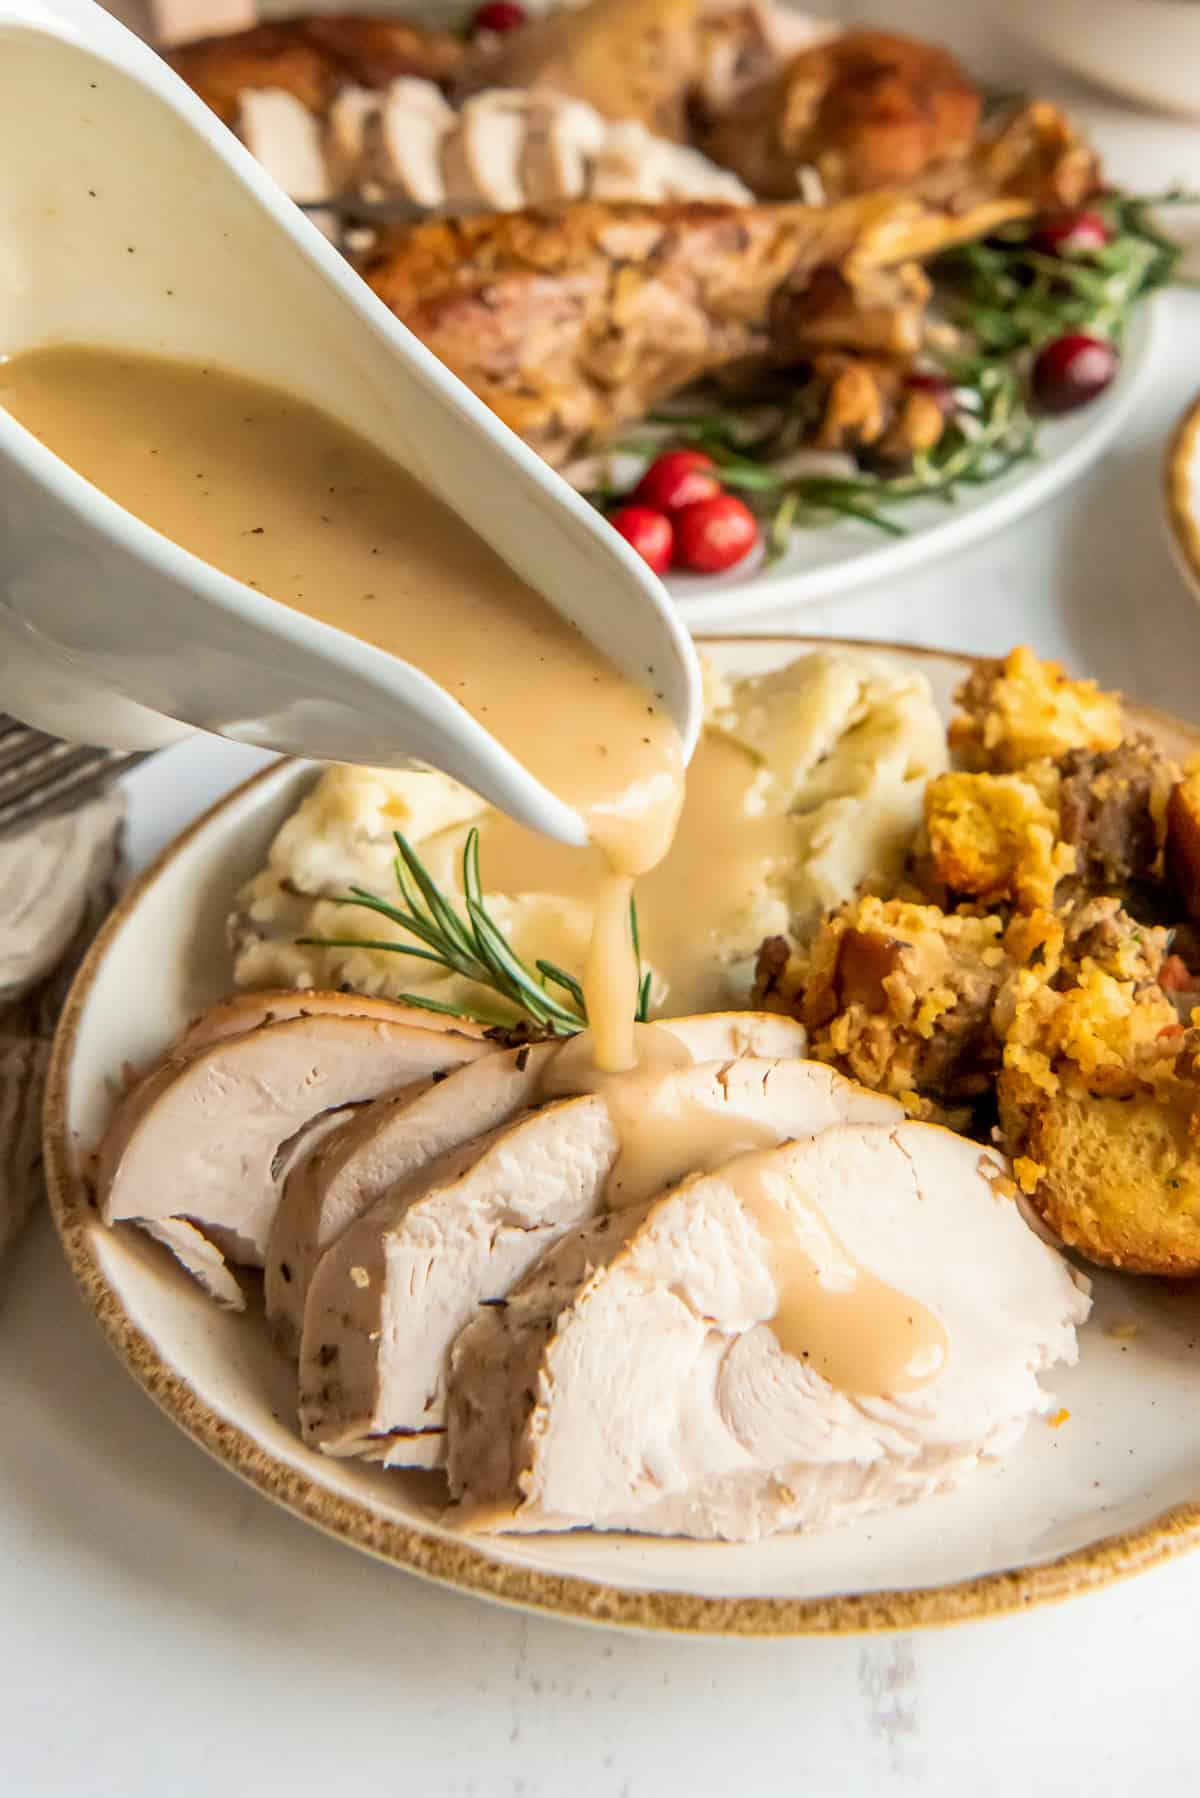 Gravy pouring from a gravy boat over sliced turkey on a plate.